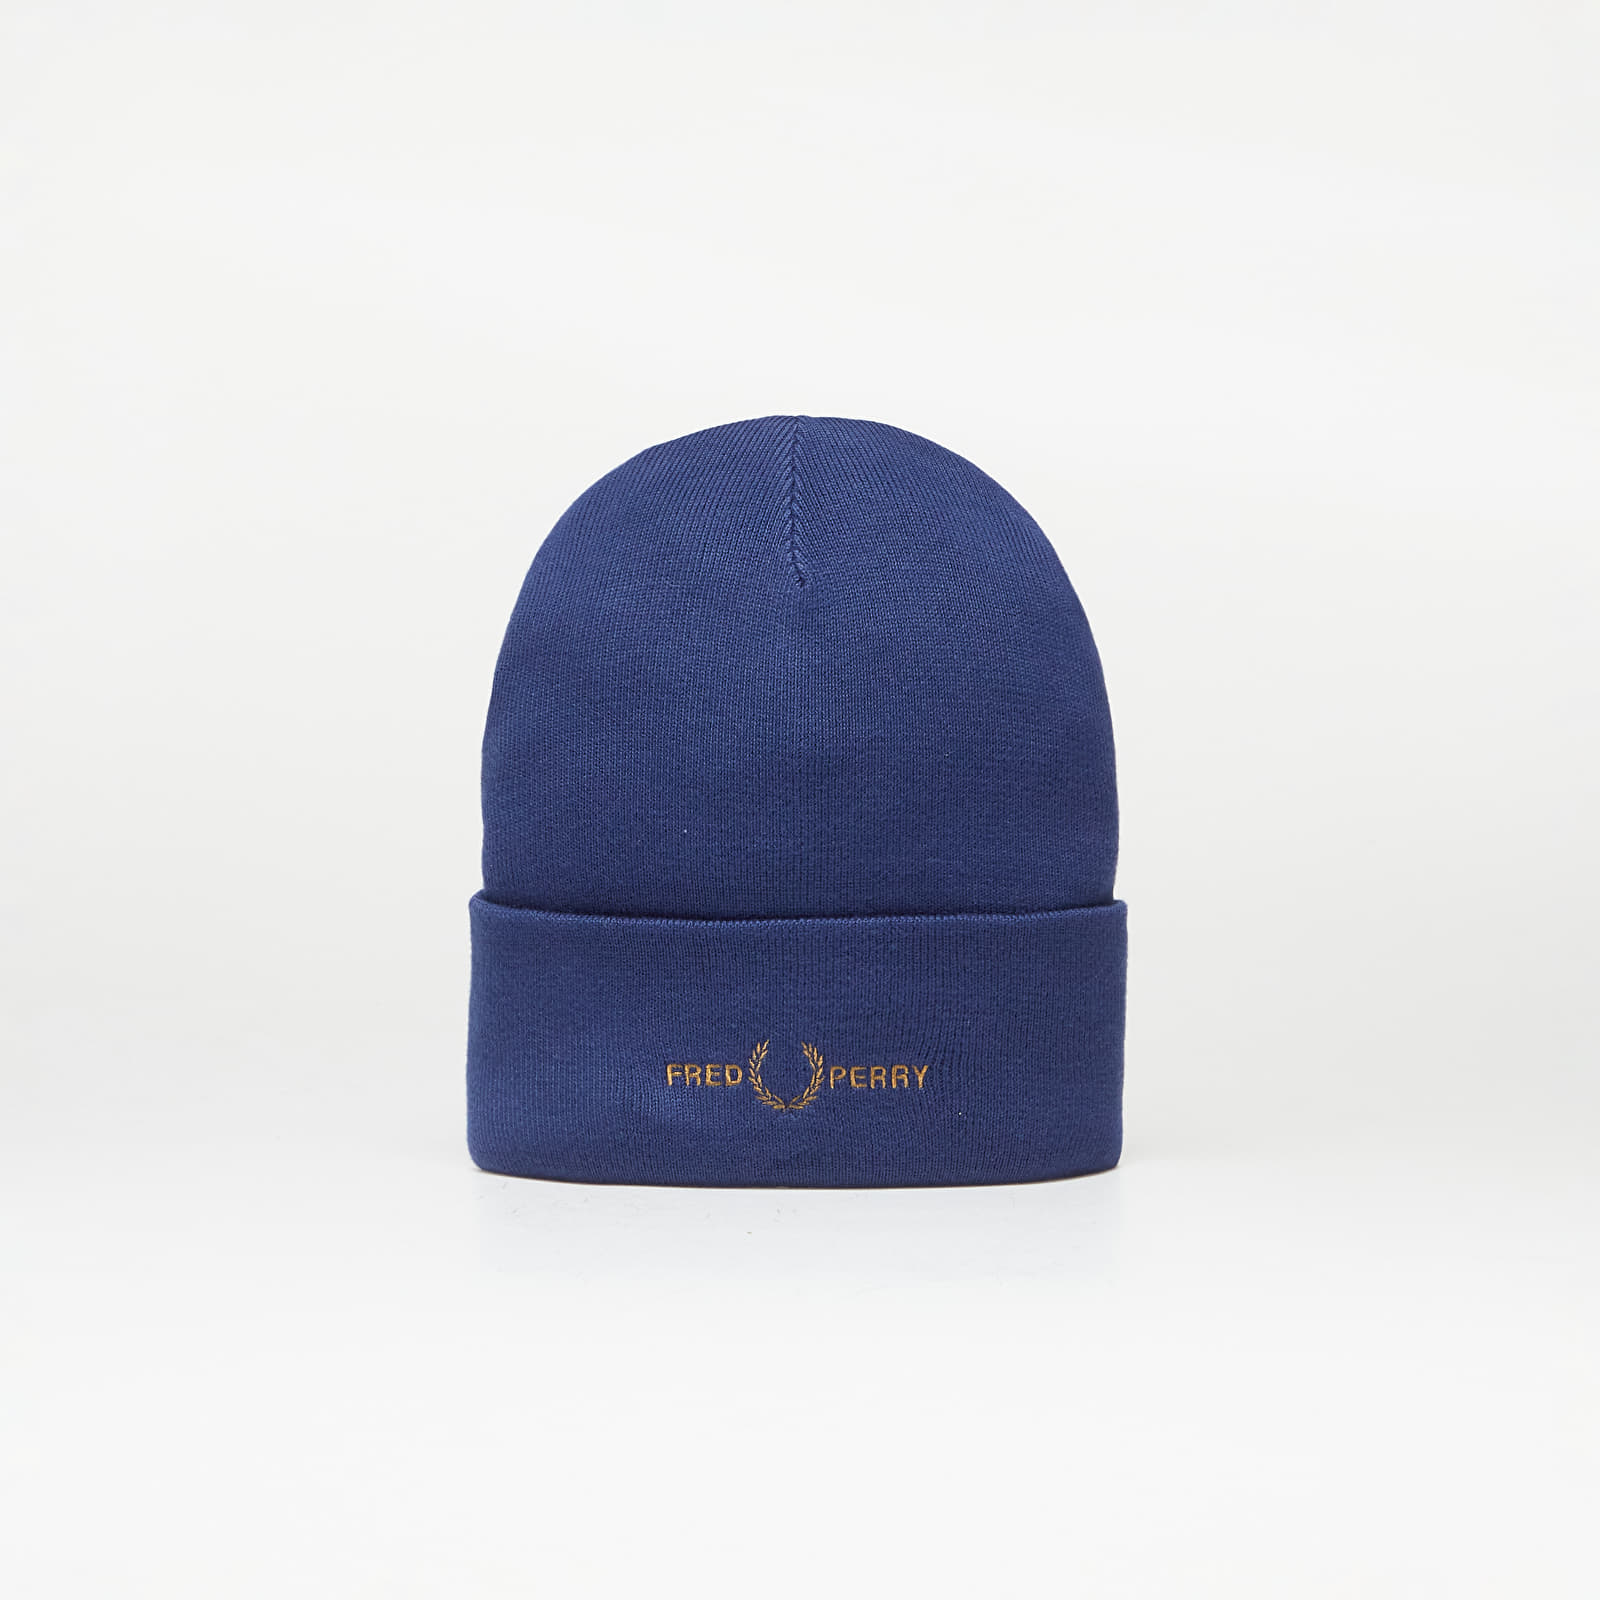 FRED PERRY - graphic beanie french navy/ dark caramel